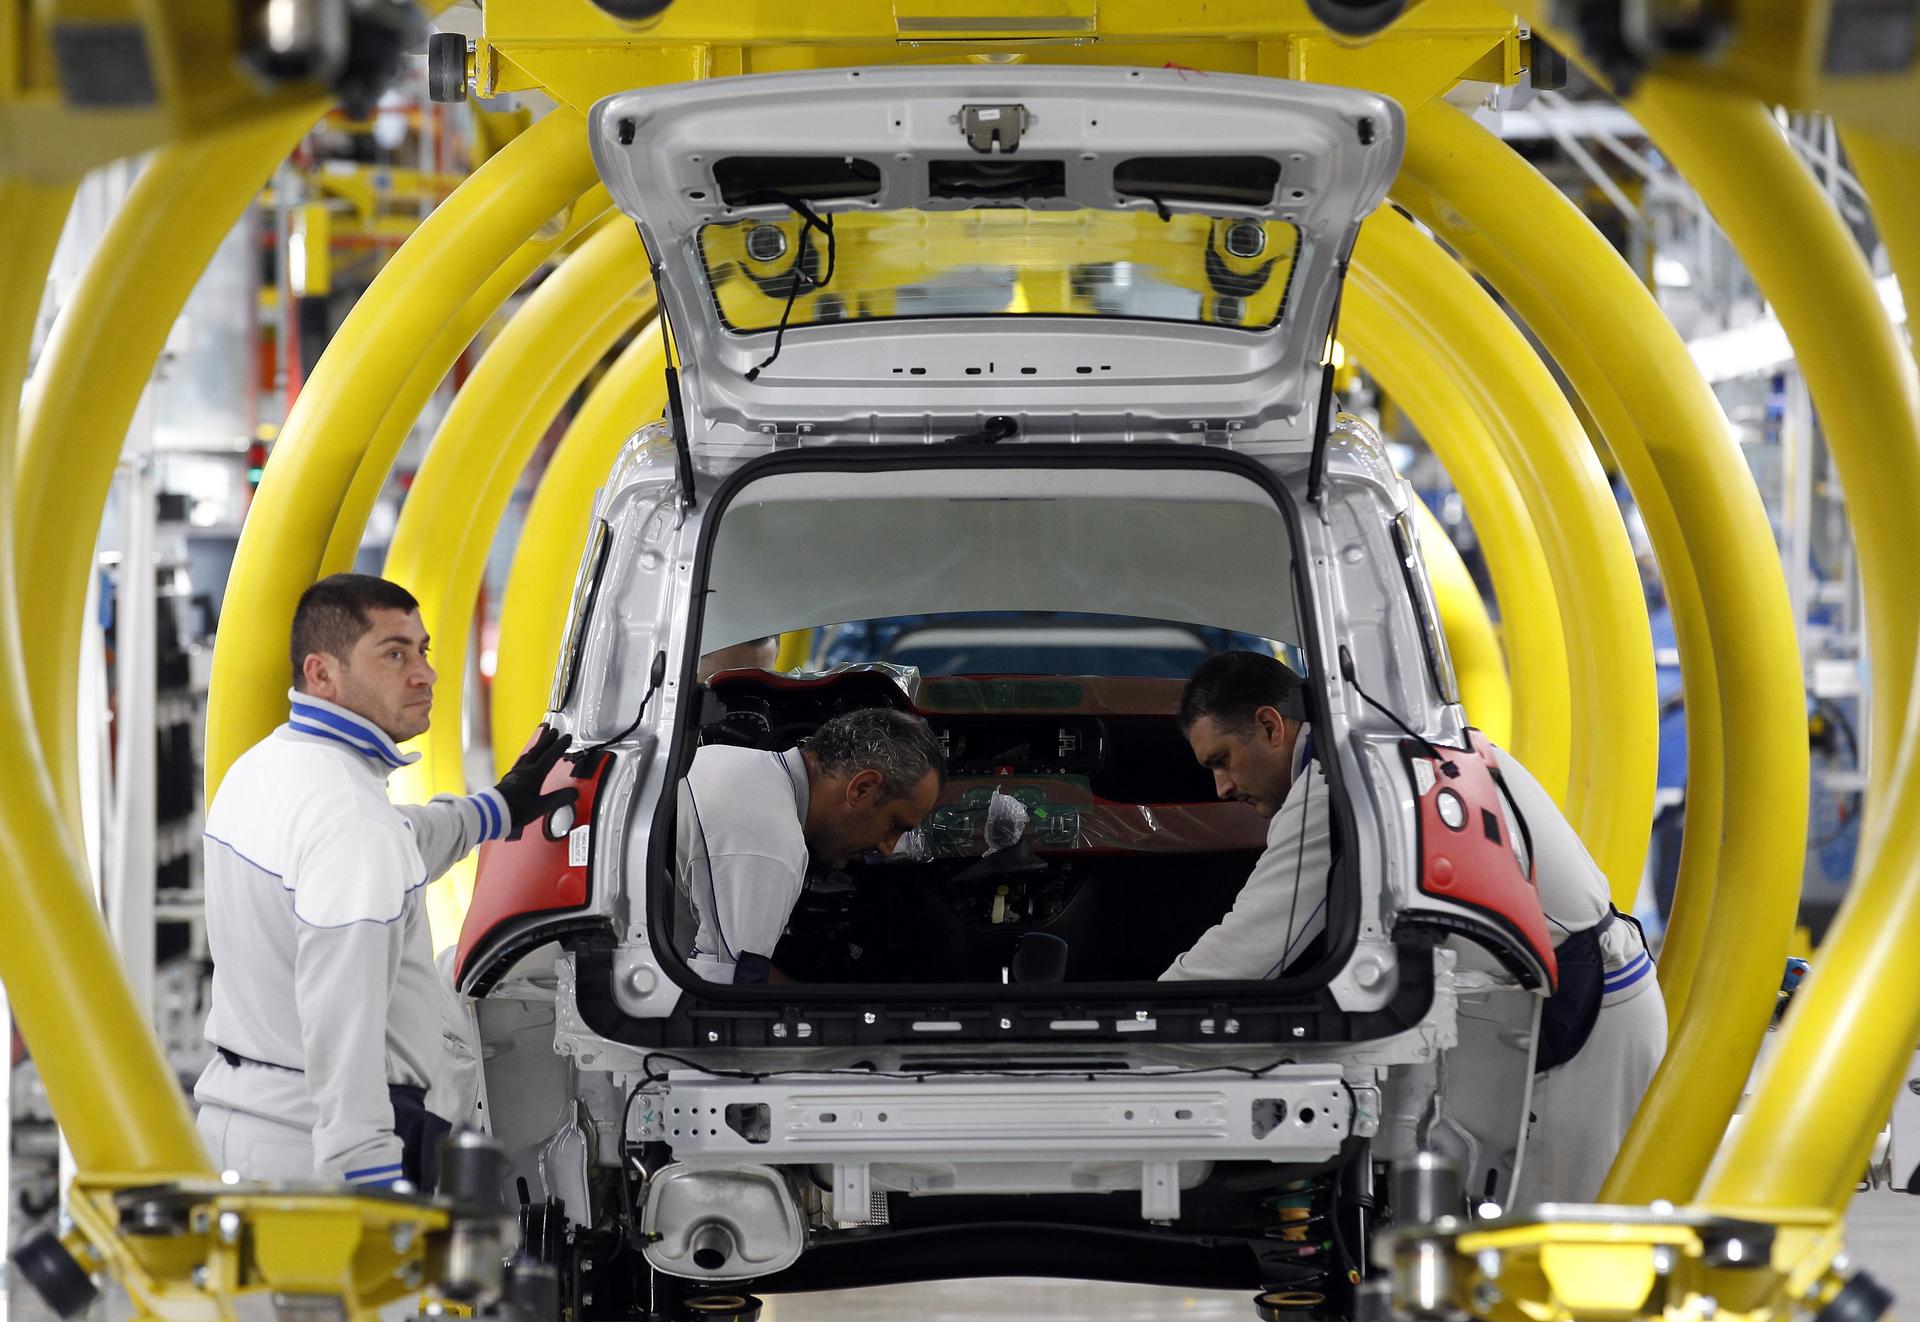 Fiat's plan to cut losses in Europe depends on its ability to deepen ties with Chrysler. Photo: Reuters